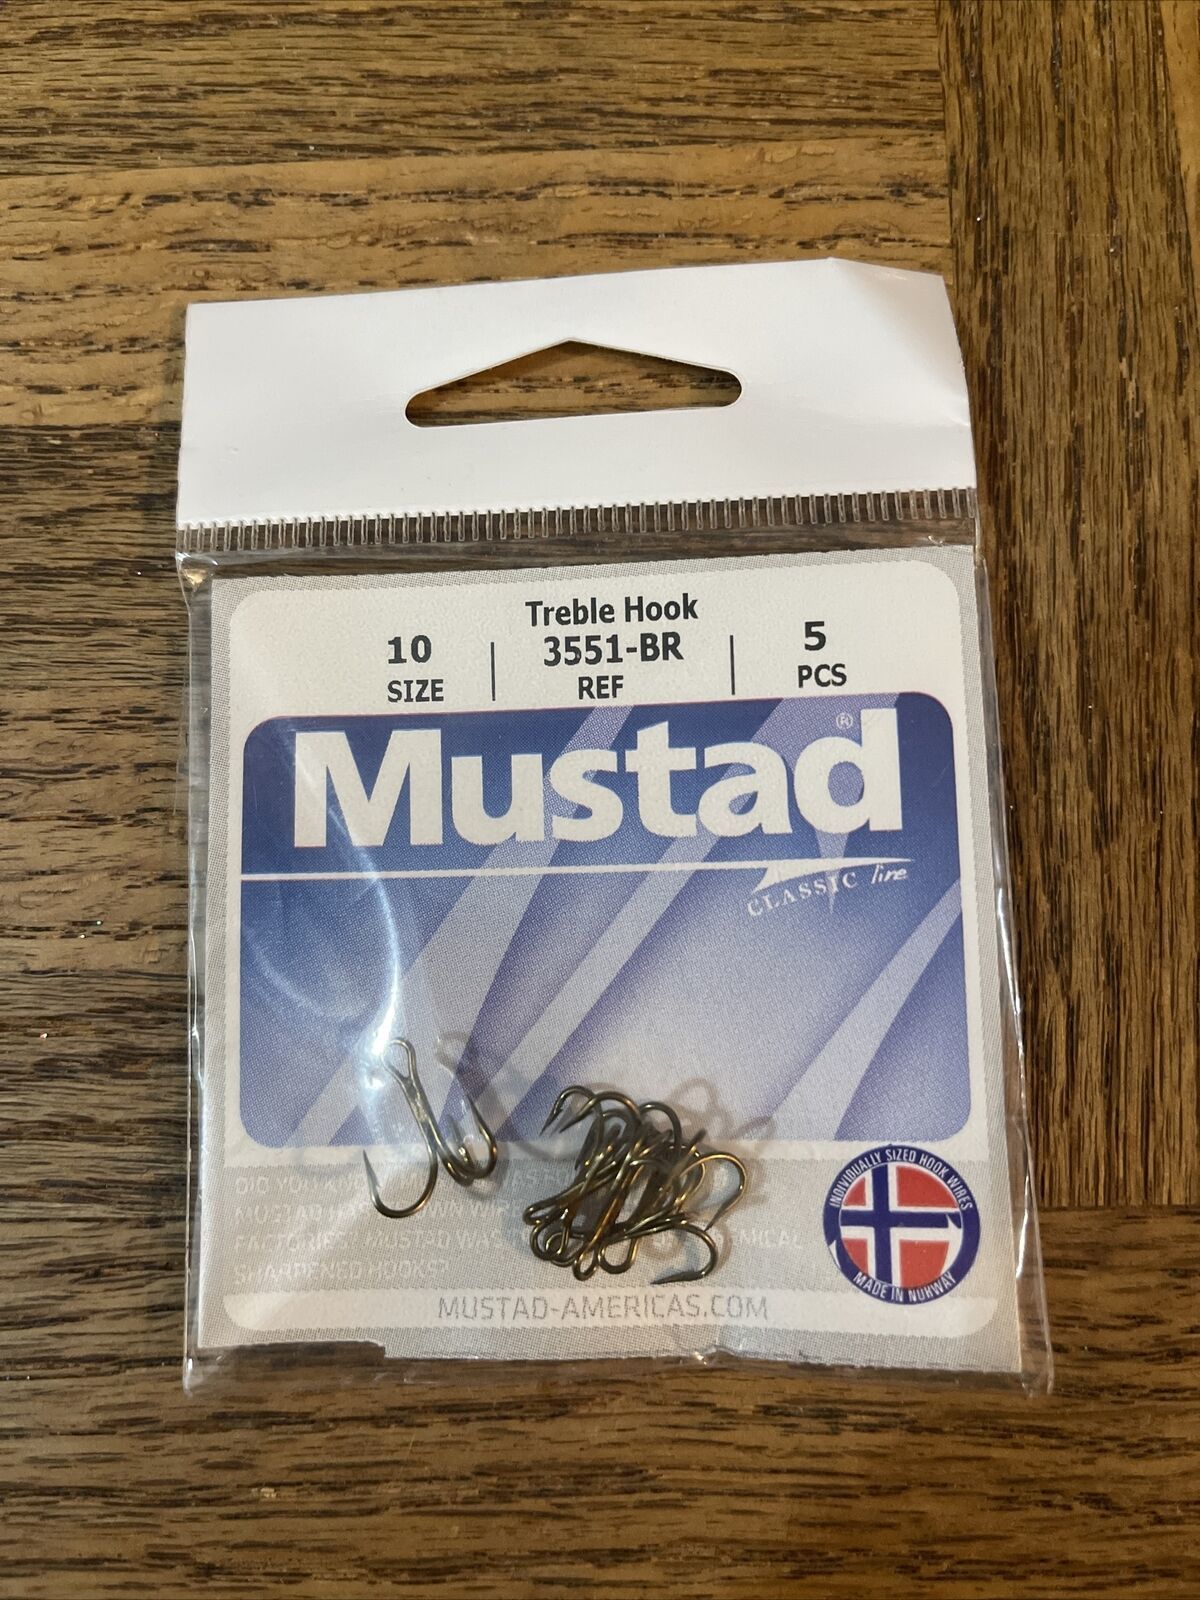 Primary image for Mustad treble hook size 10